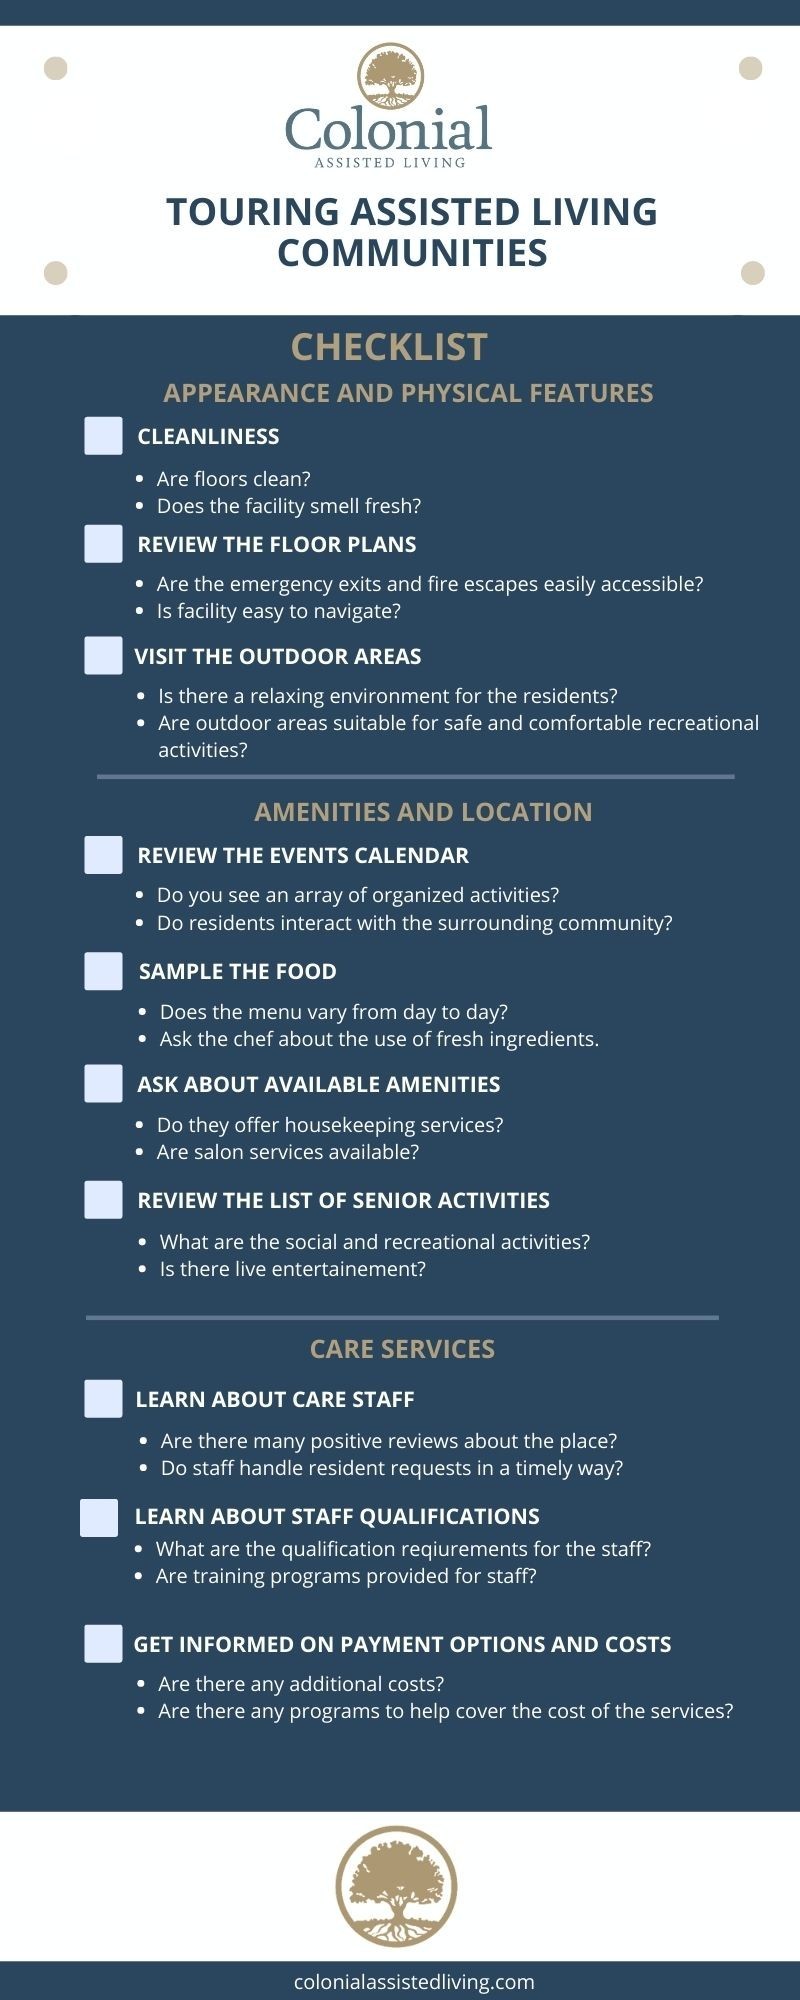 Checklist for Touring Assisted Living Communities